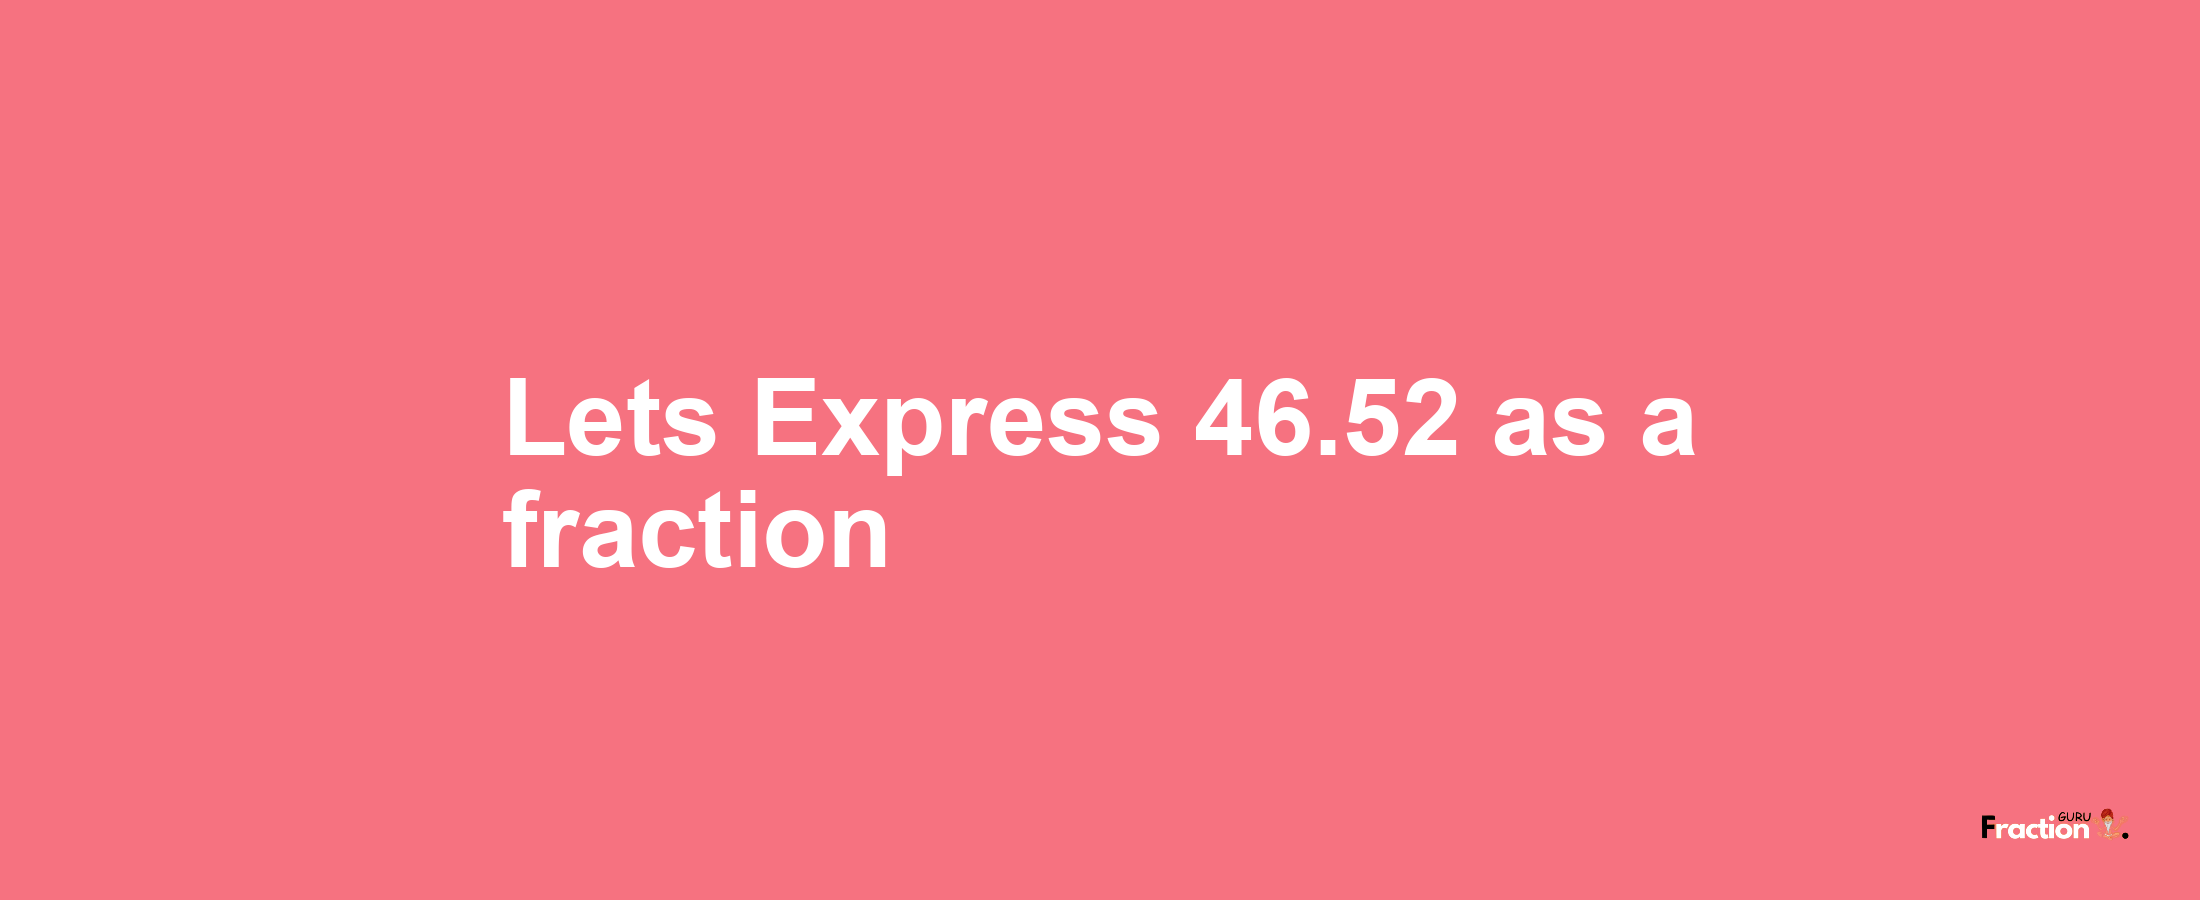 Lets Express 46.52 as afraction